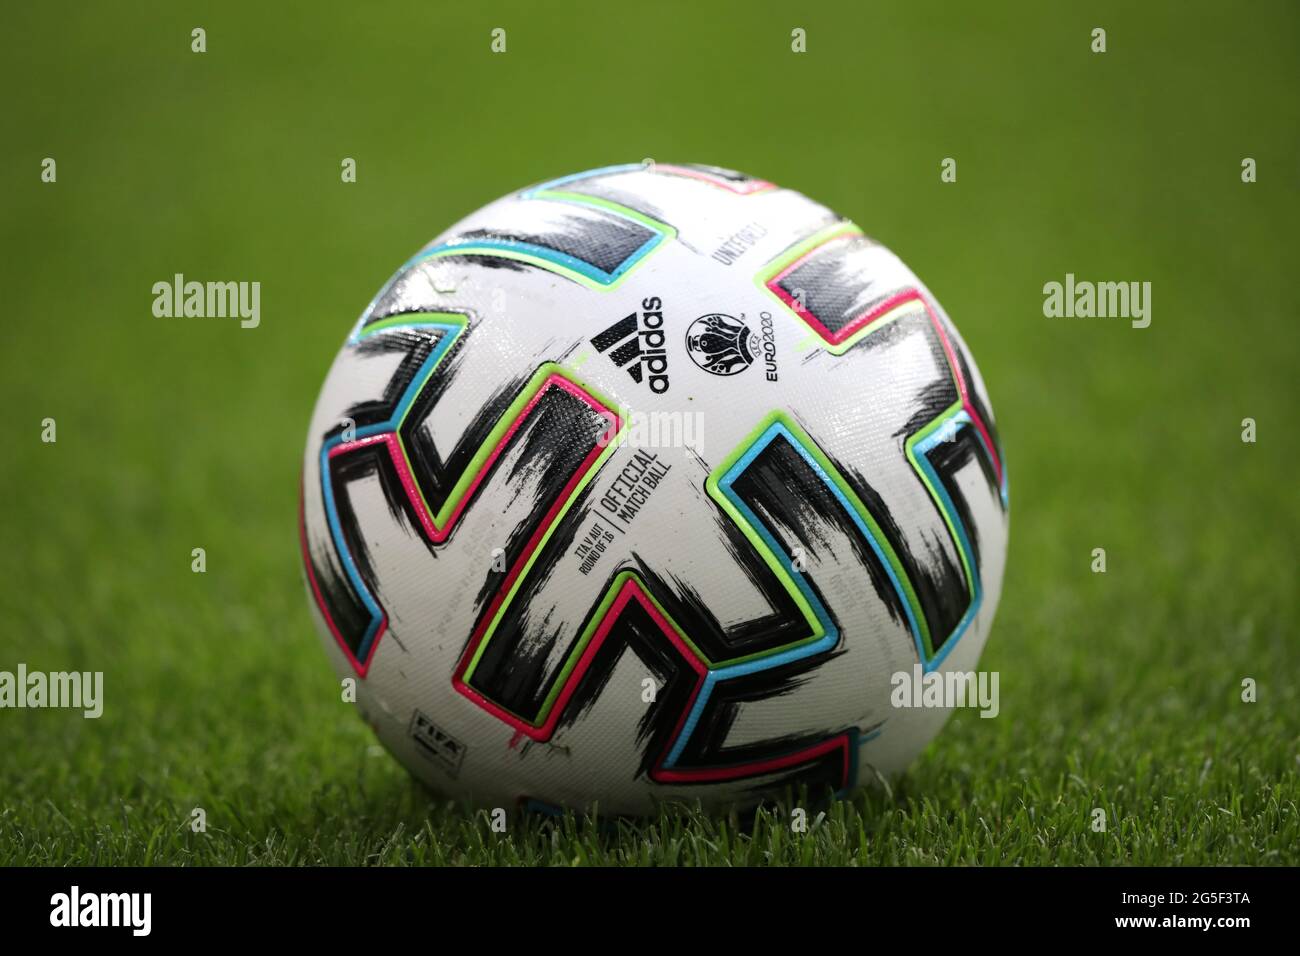 London, UK. 26th June, 2021. The adidas official ball at the Italy v  Austria UEFA EURO 2020 Group C match at Wembley Stadium, London, UK, on  June 26, 2020. Credit: Paul Marriott/Alamy